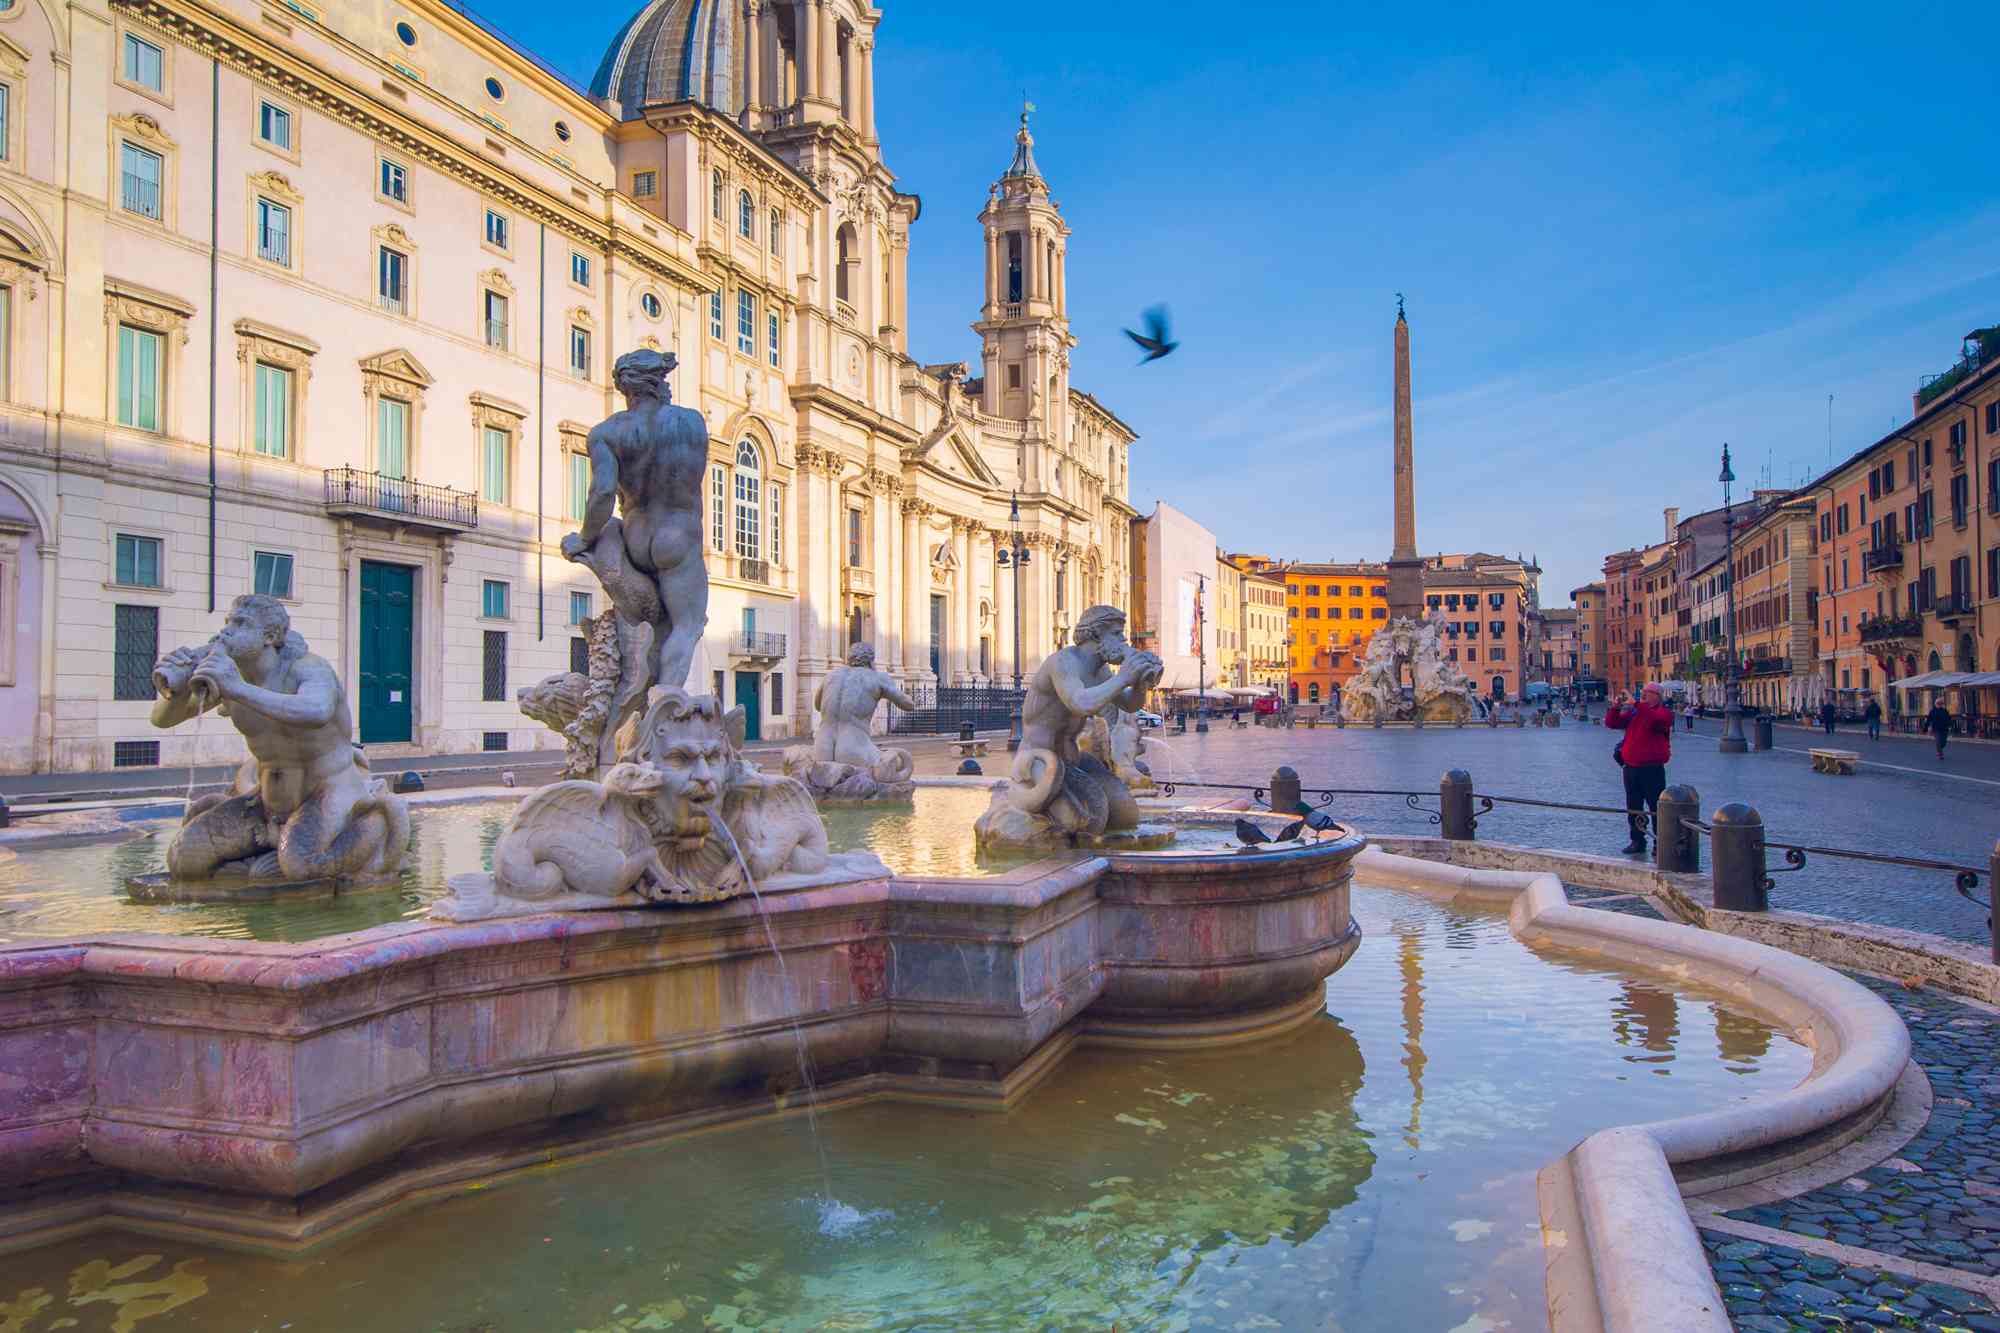 20 Best Things to Do in Rome, According to Locals